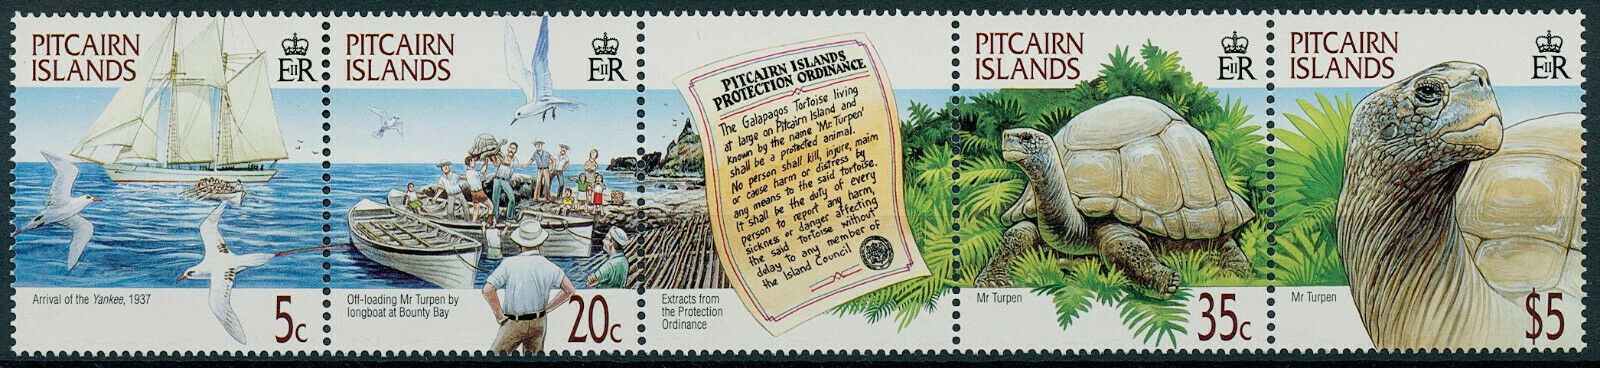 Pitcairn Islands 2000 MNH Turtles Stamps Mr Turpen Galapagos Tortoise 4v Strip